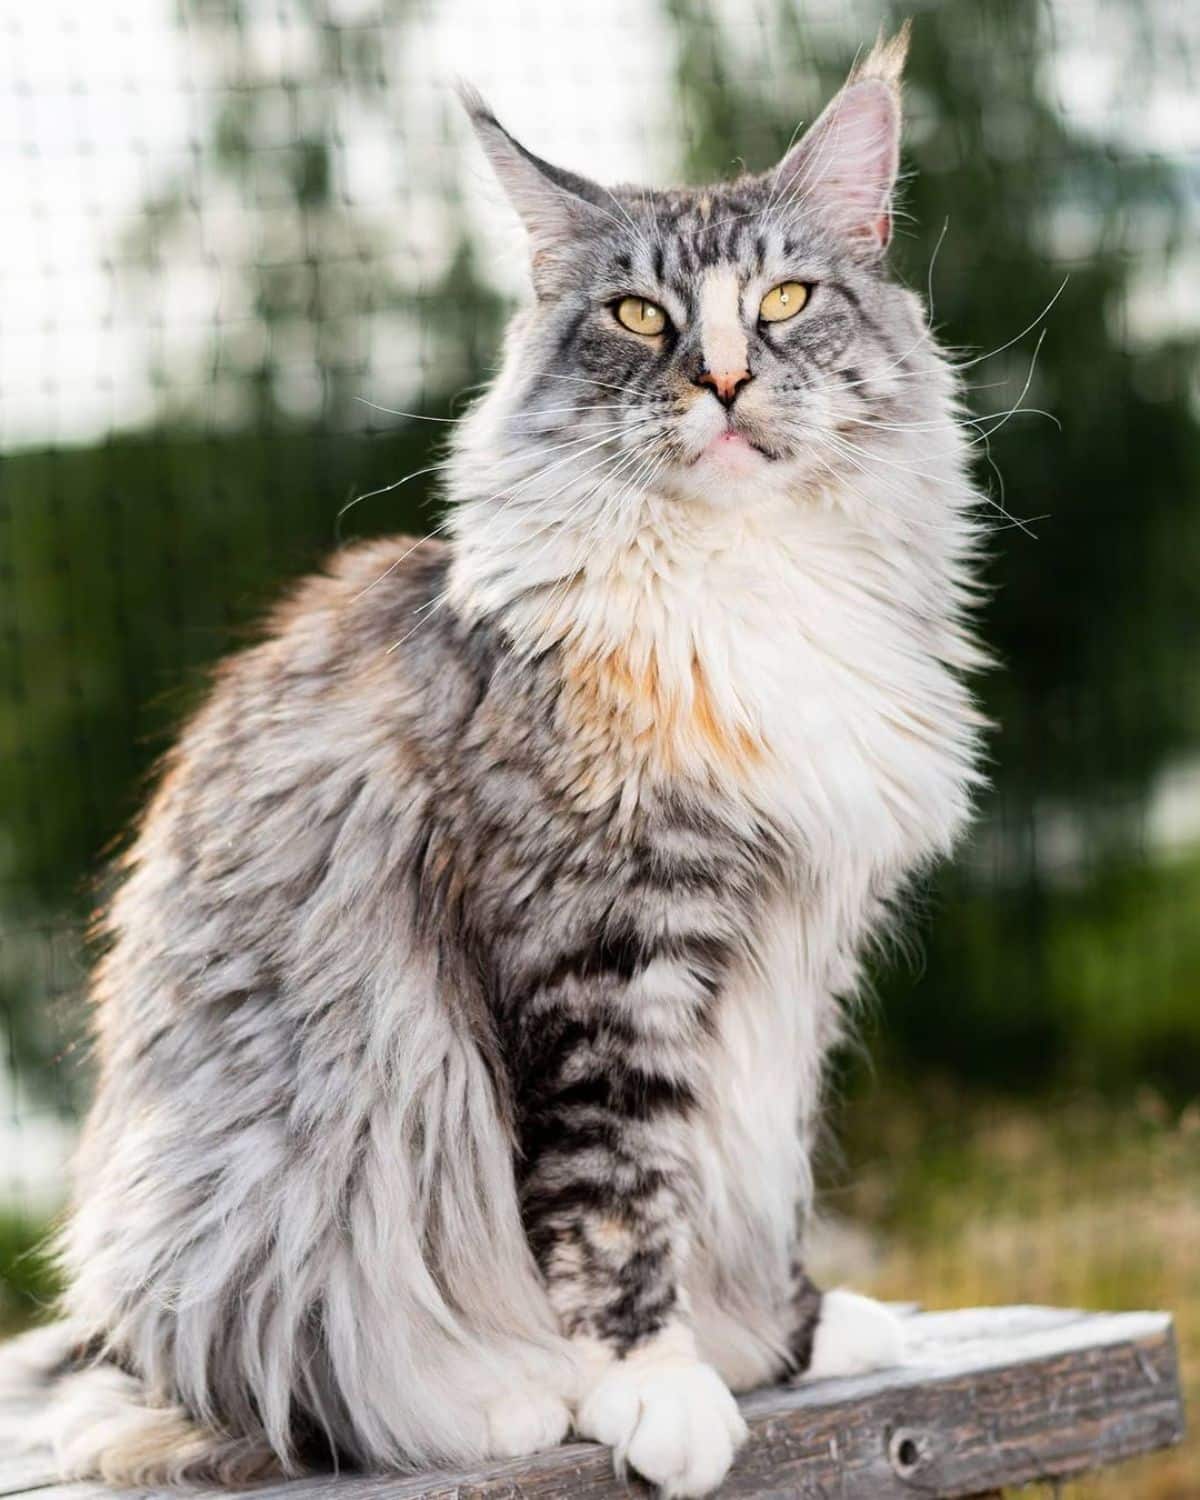 An adorable gray maine coon sitting on a wooden table outdoor.